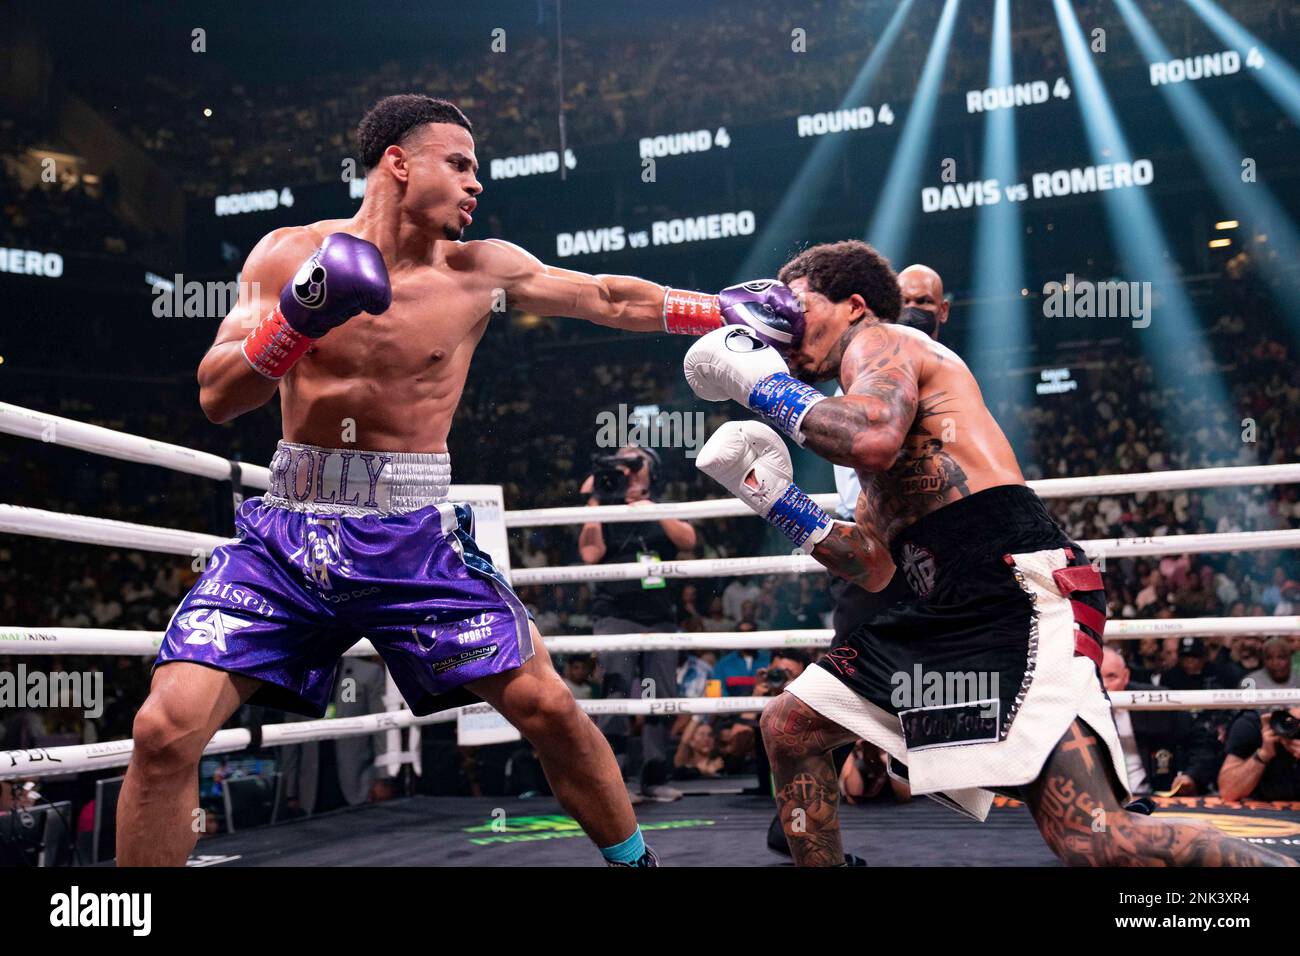 May 29, 2022, Brooklyn, New York, USA GERVONTA DAVIS (black and white trunks) battles ROLANDO ROMERO in a WBA Lightweight Championship bout at the Barclays Center in Brooklyn, New York